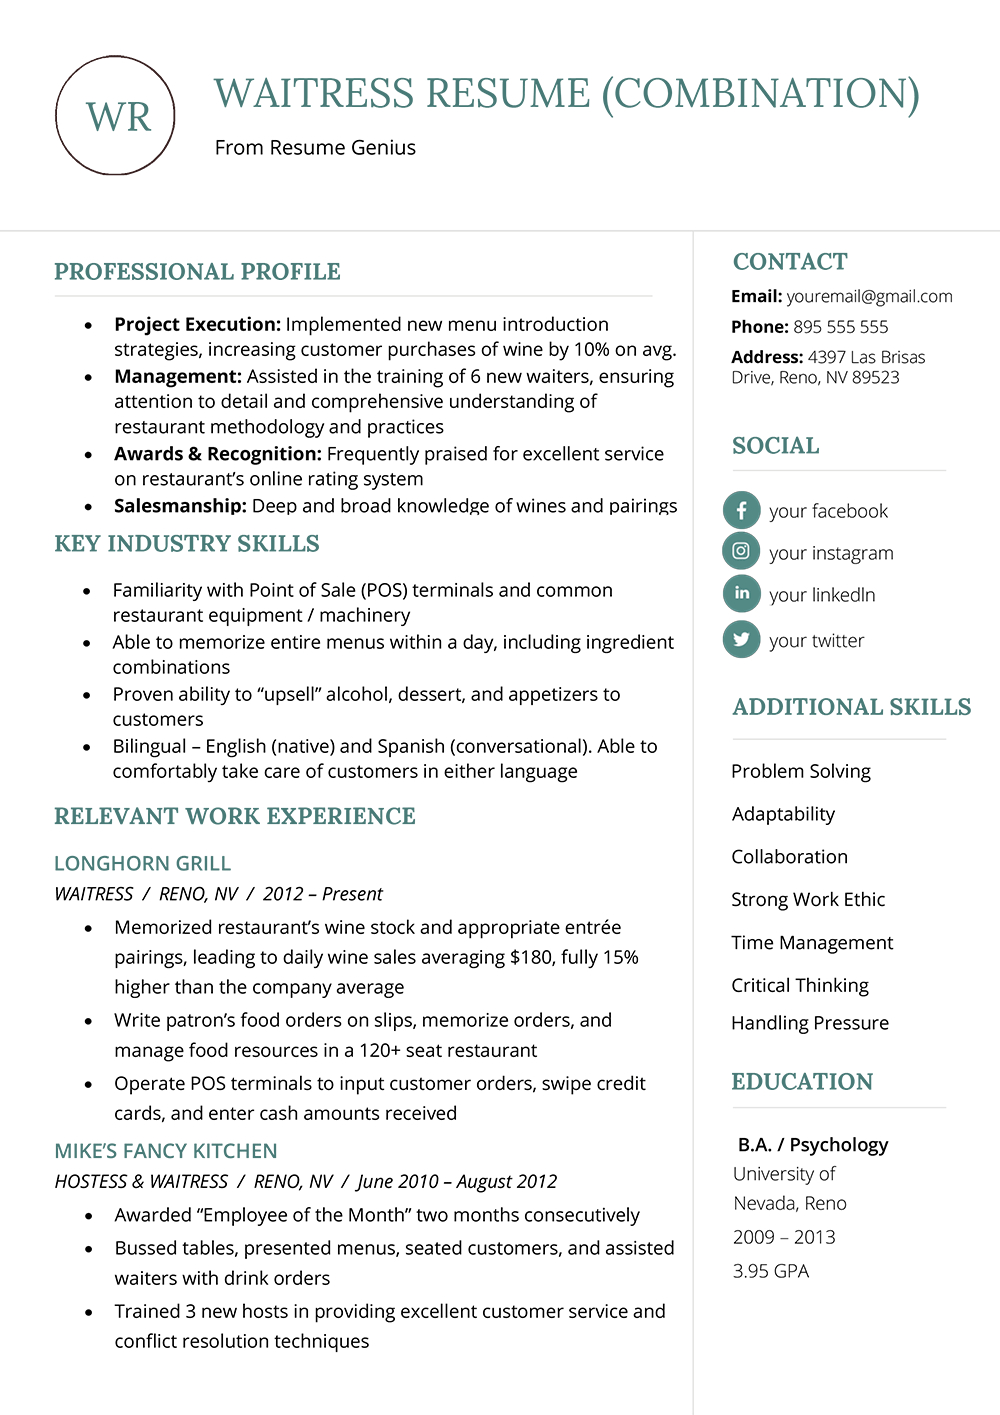 Best Resume Format Resume Format Mega Guide How To Choose The Best Type For You Rg